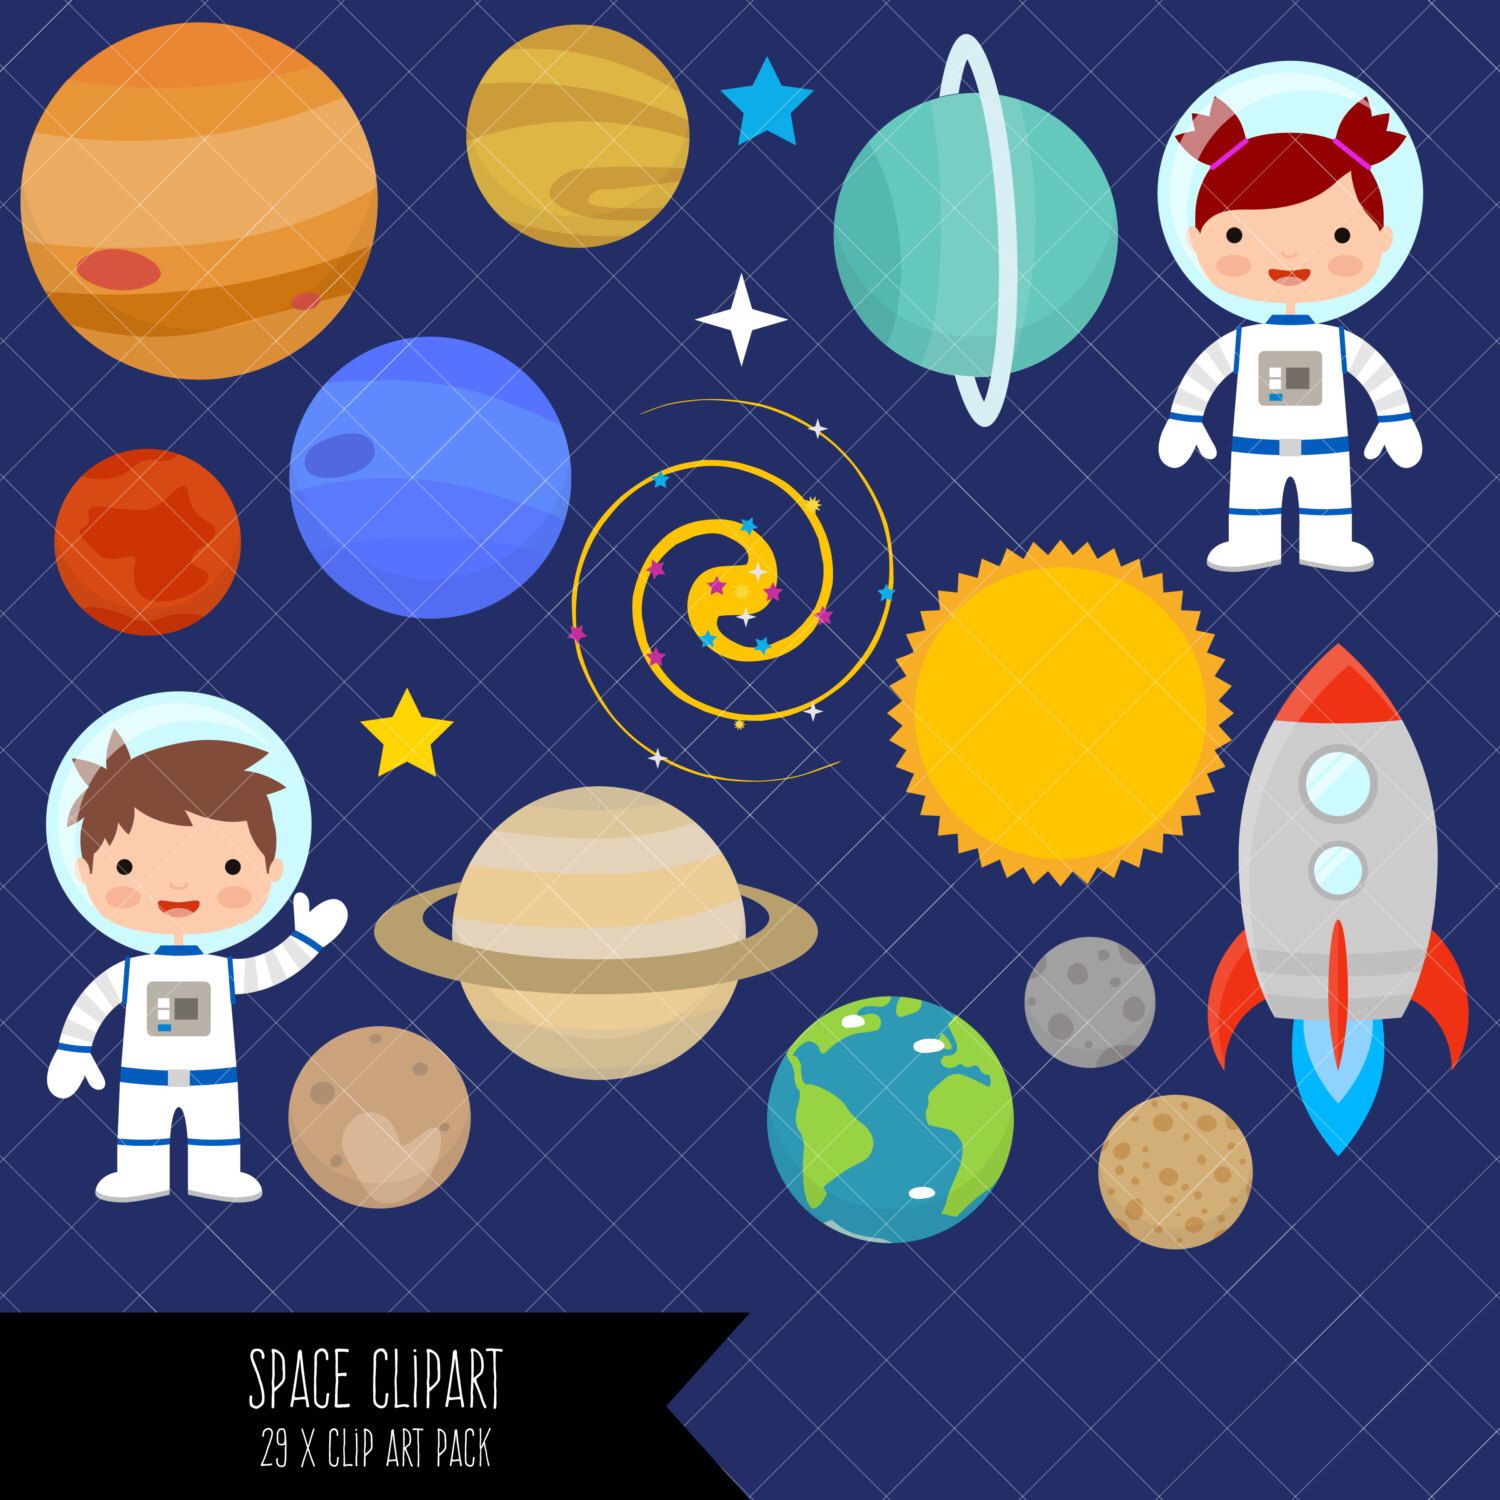 Space clipart planets.